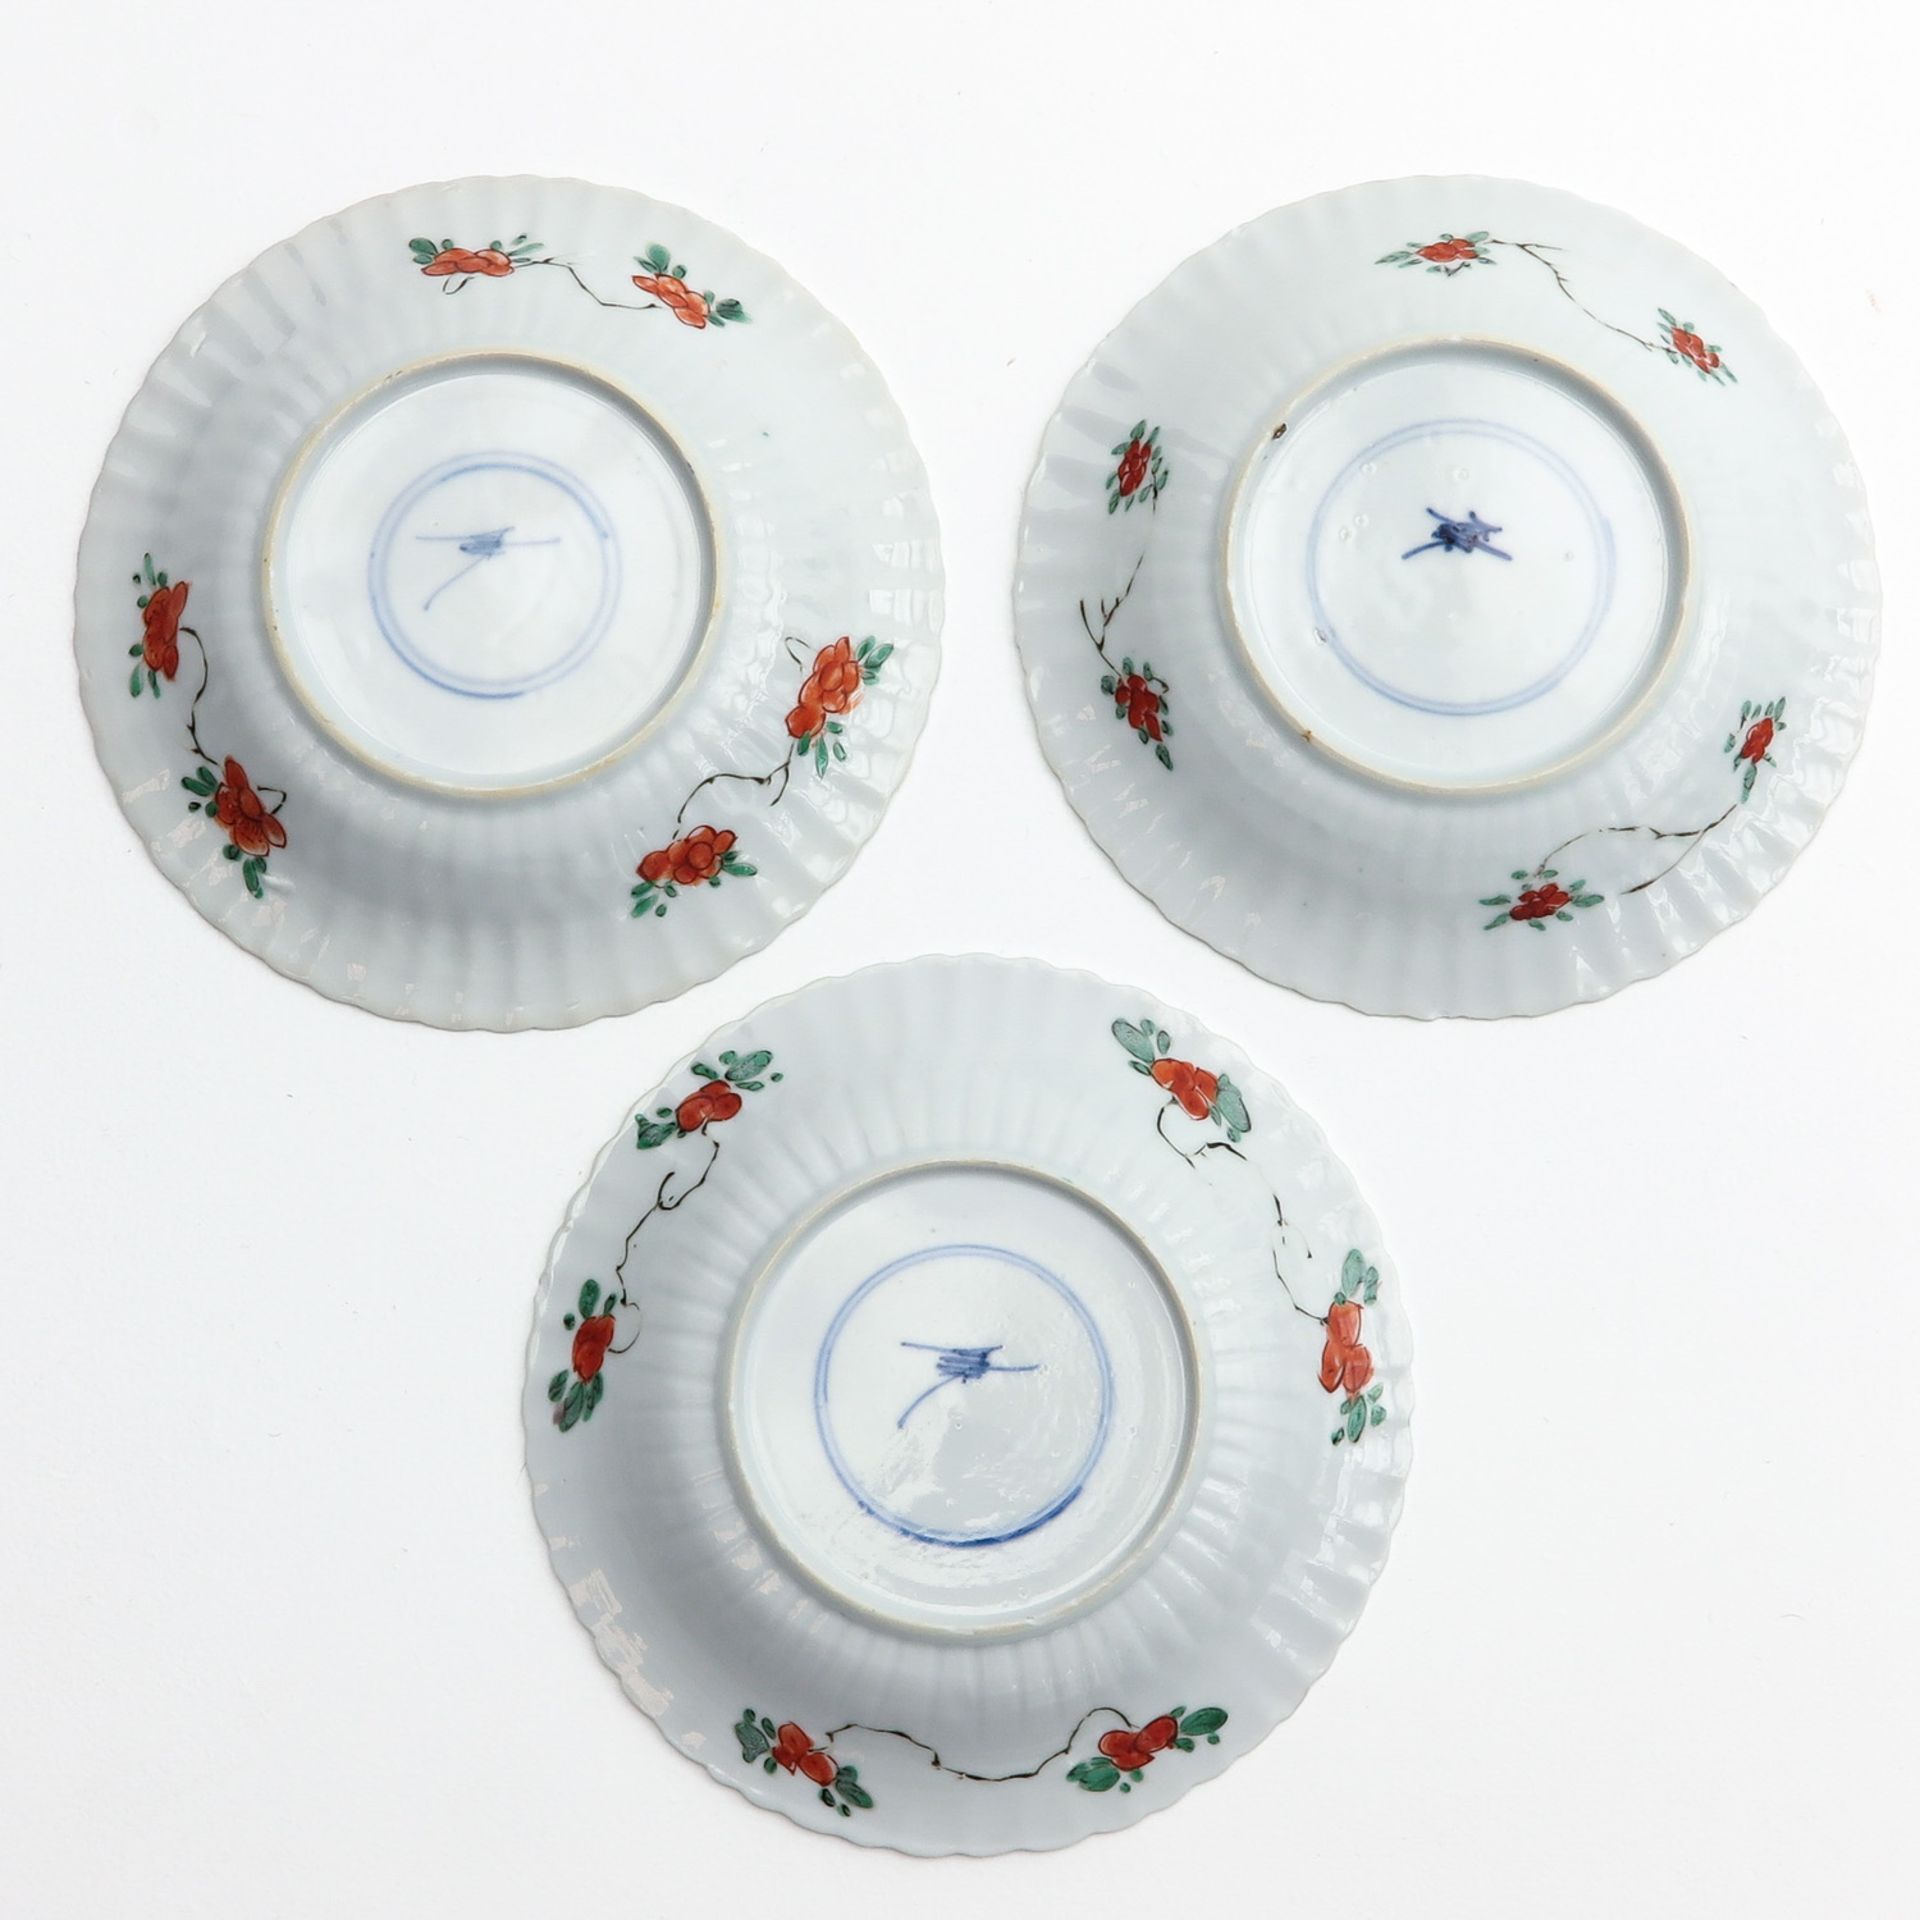 A Collection of 5 Polycrhome Plates - Image 4 of 10